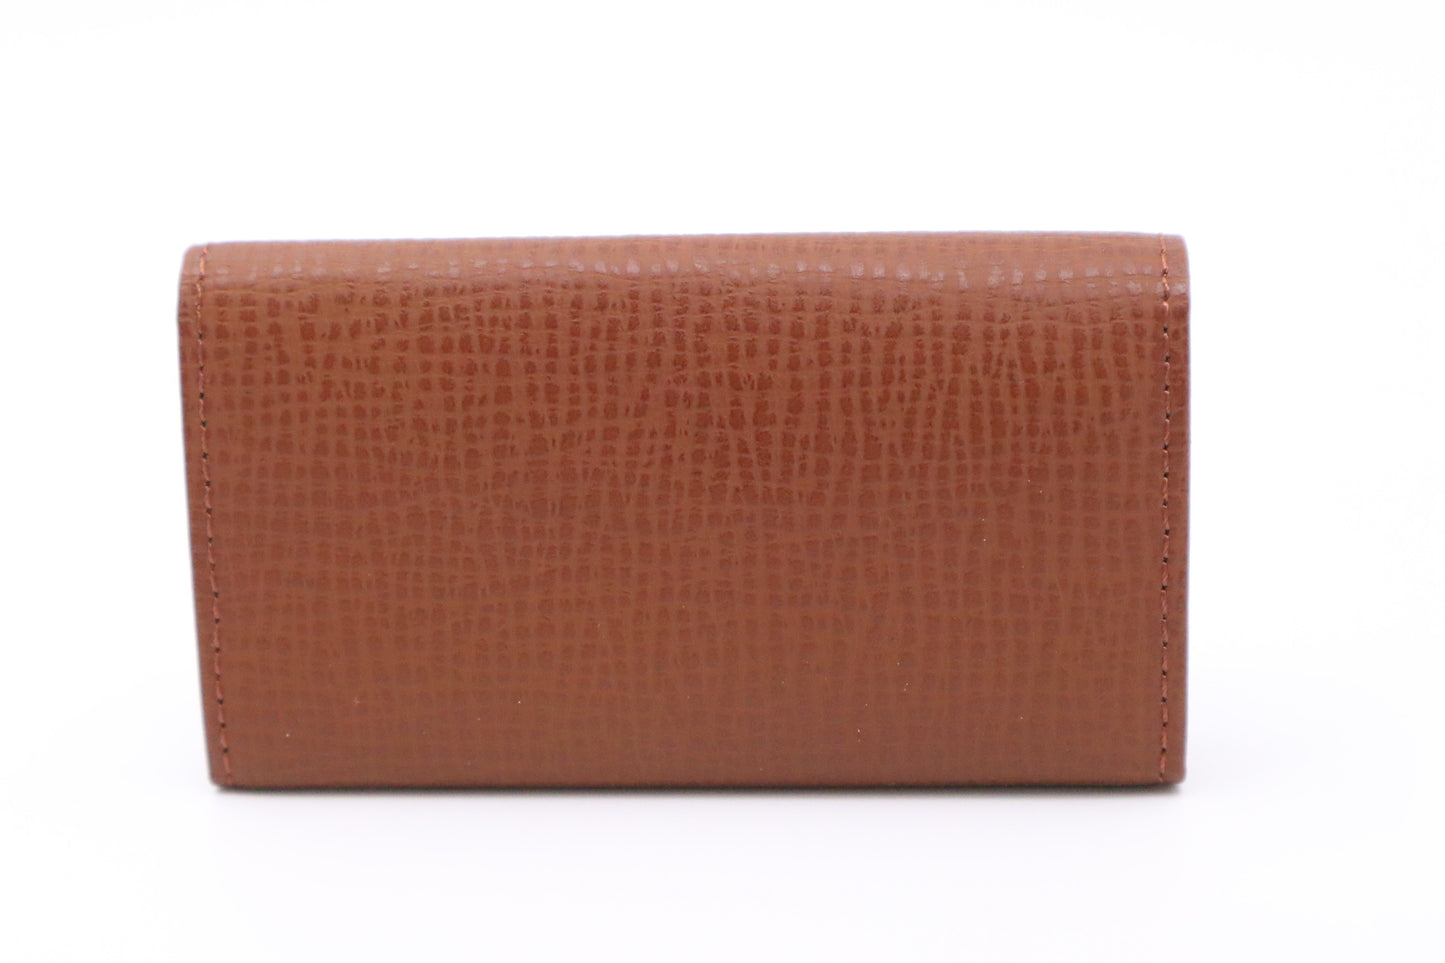 Burberry Key Case in Brown Leather